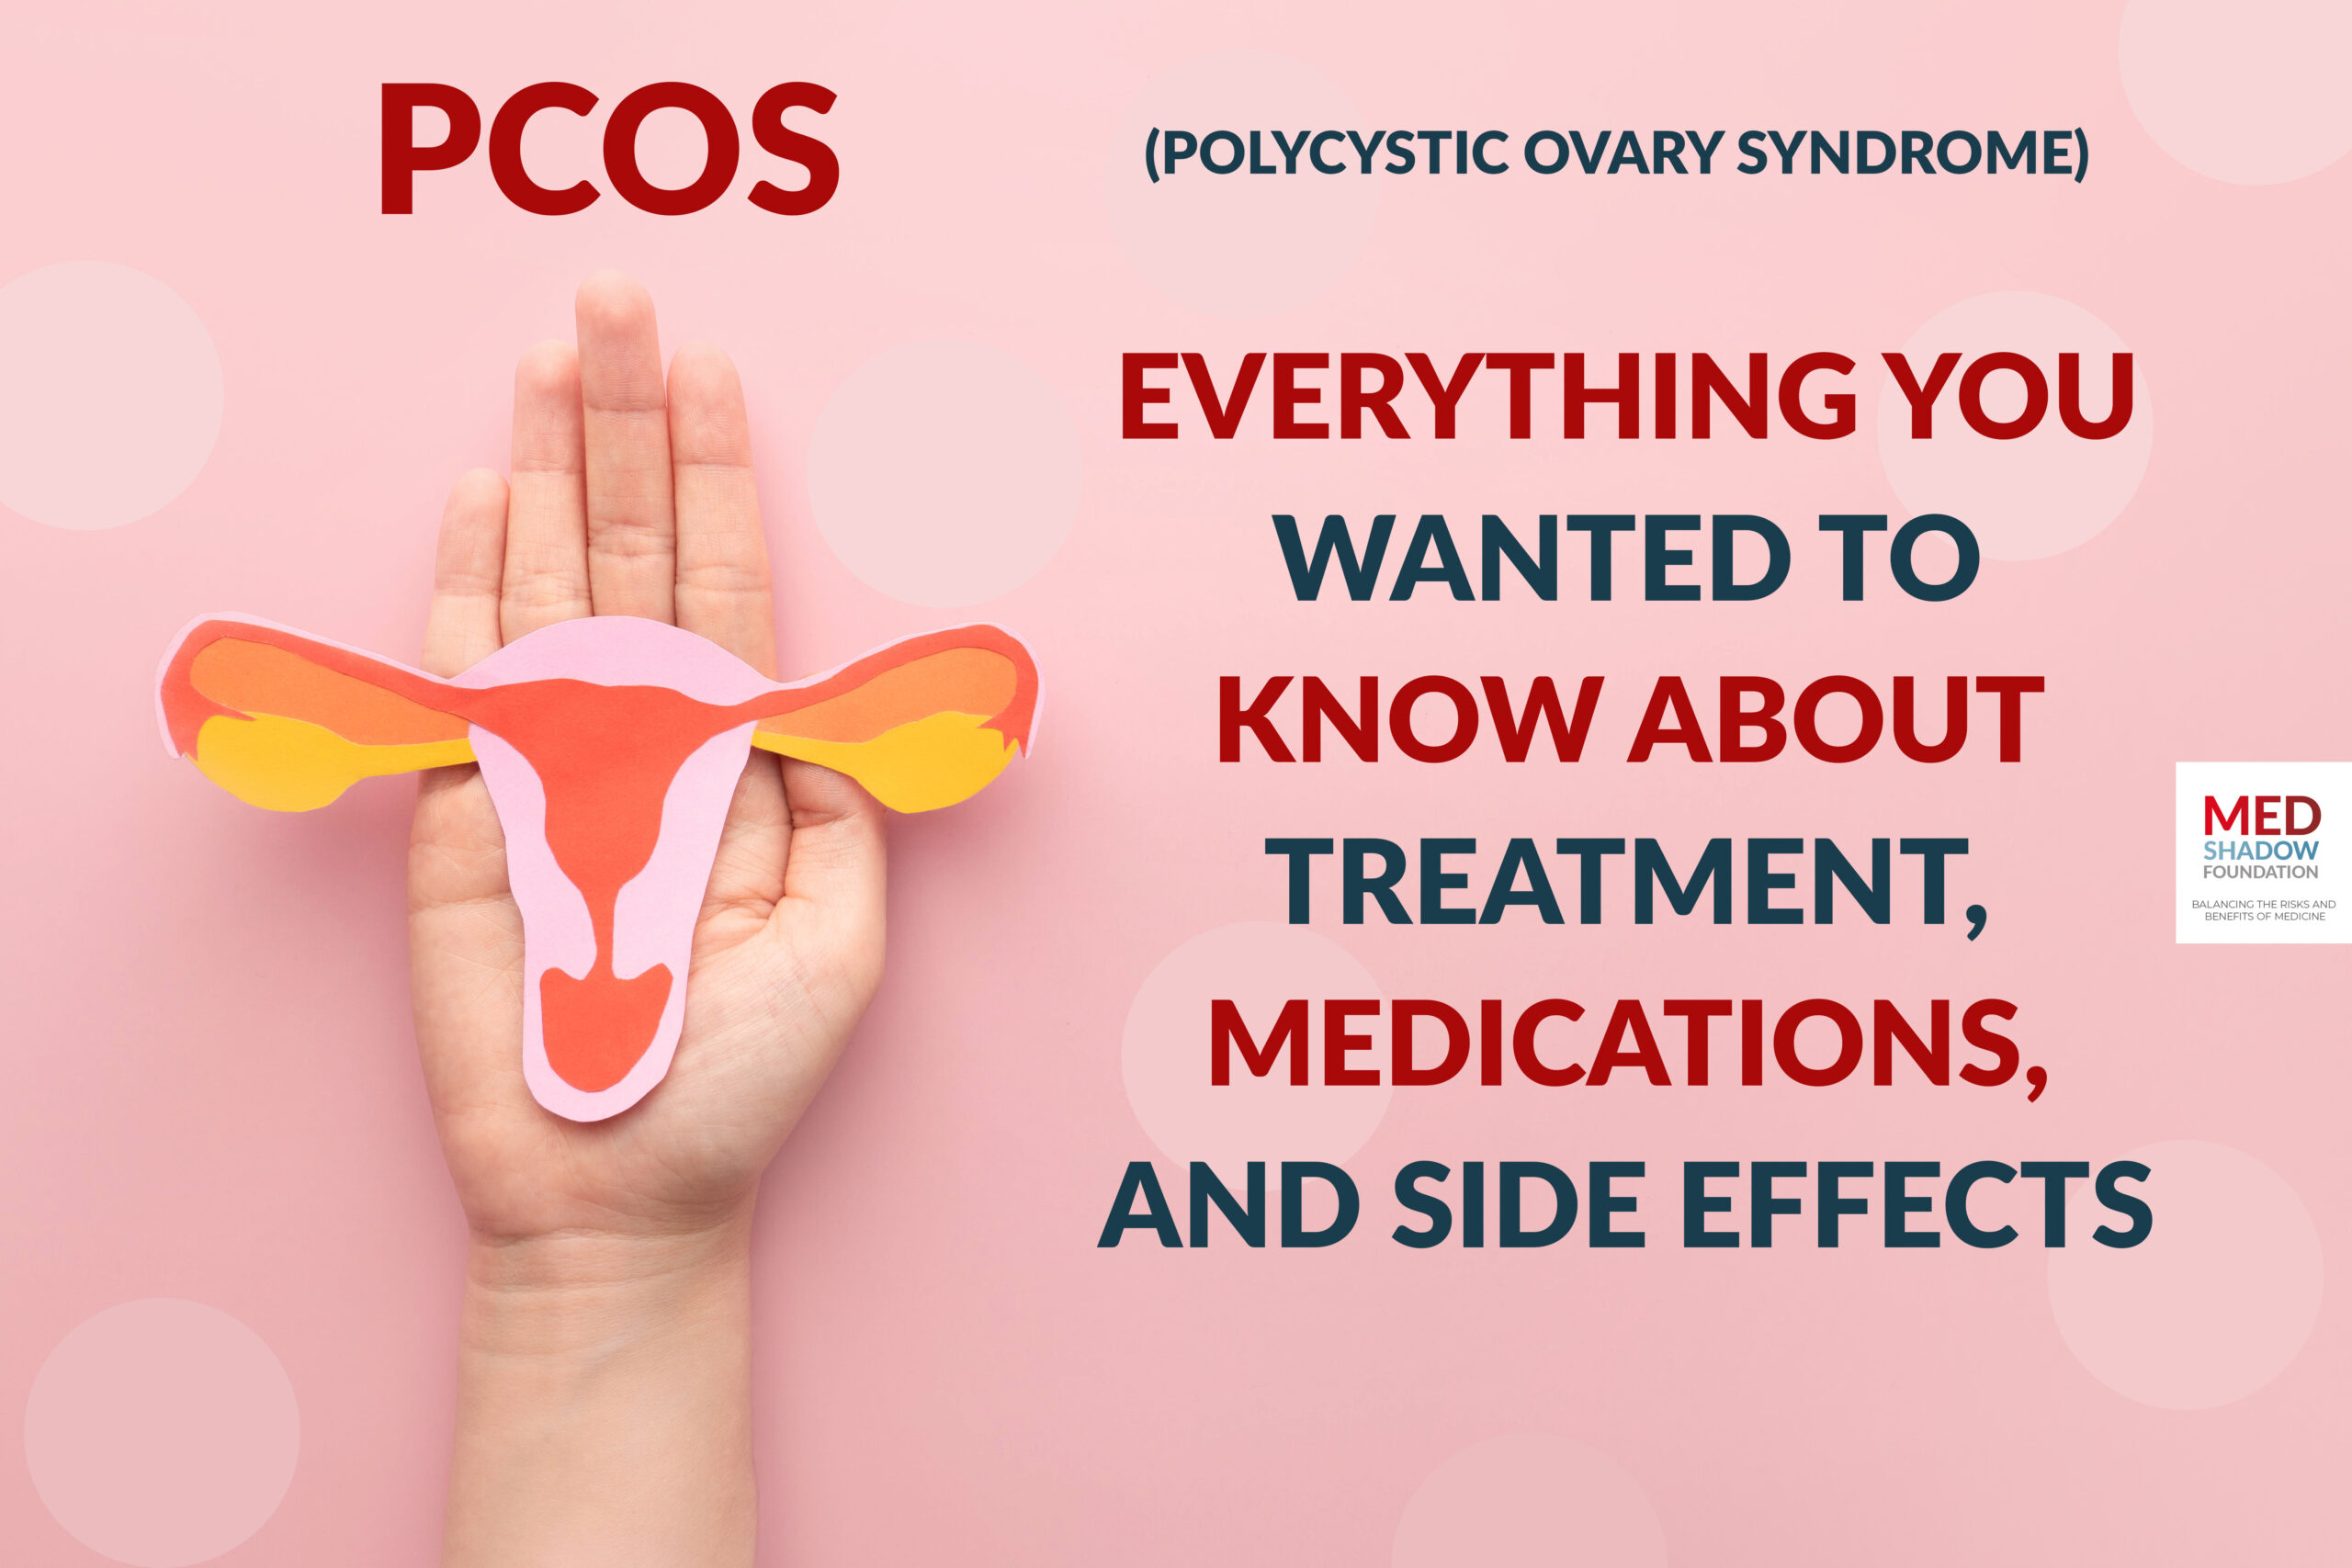 PCOS: 7 Common Symptoms to Look Out For